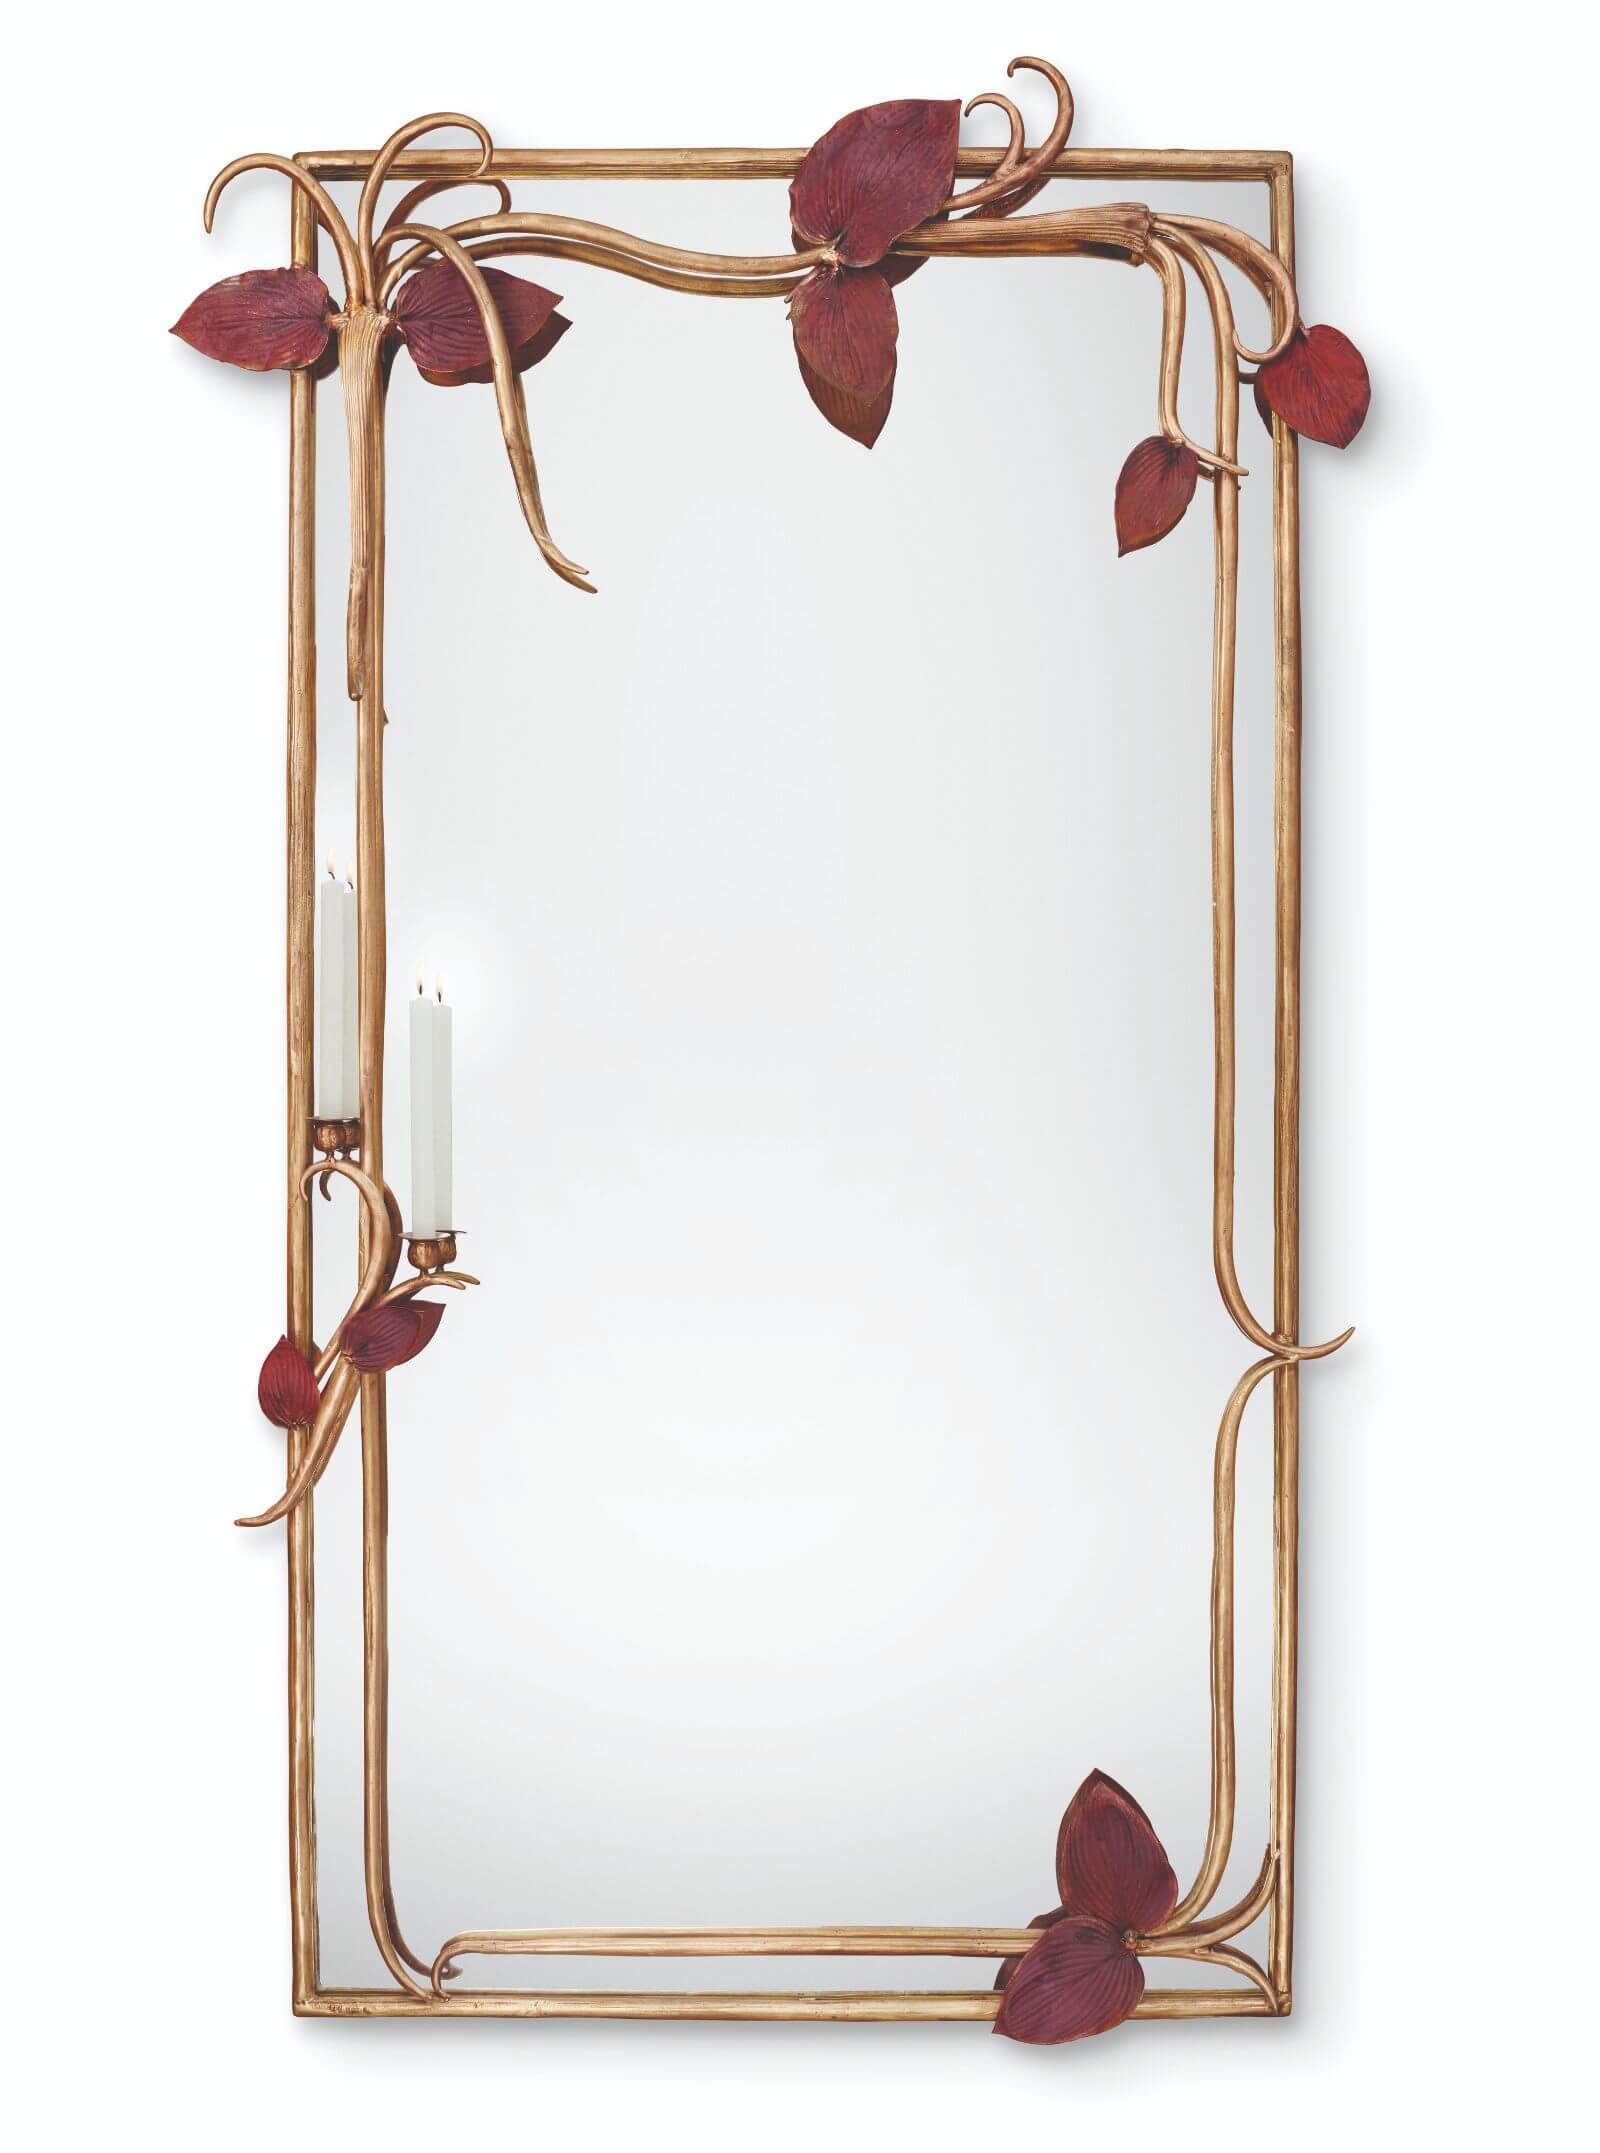 Claude Lalanne, ‘Mirror’, 2015 (Lot 119, estimate €400,000-600,000. Sold for €978,000) COURTESY: © Christie’s Images Limited 2022